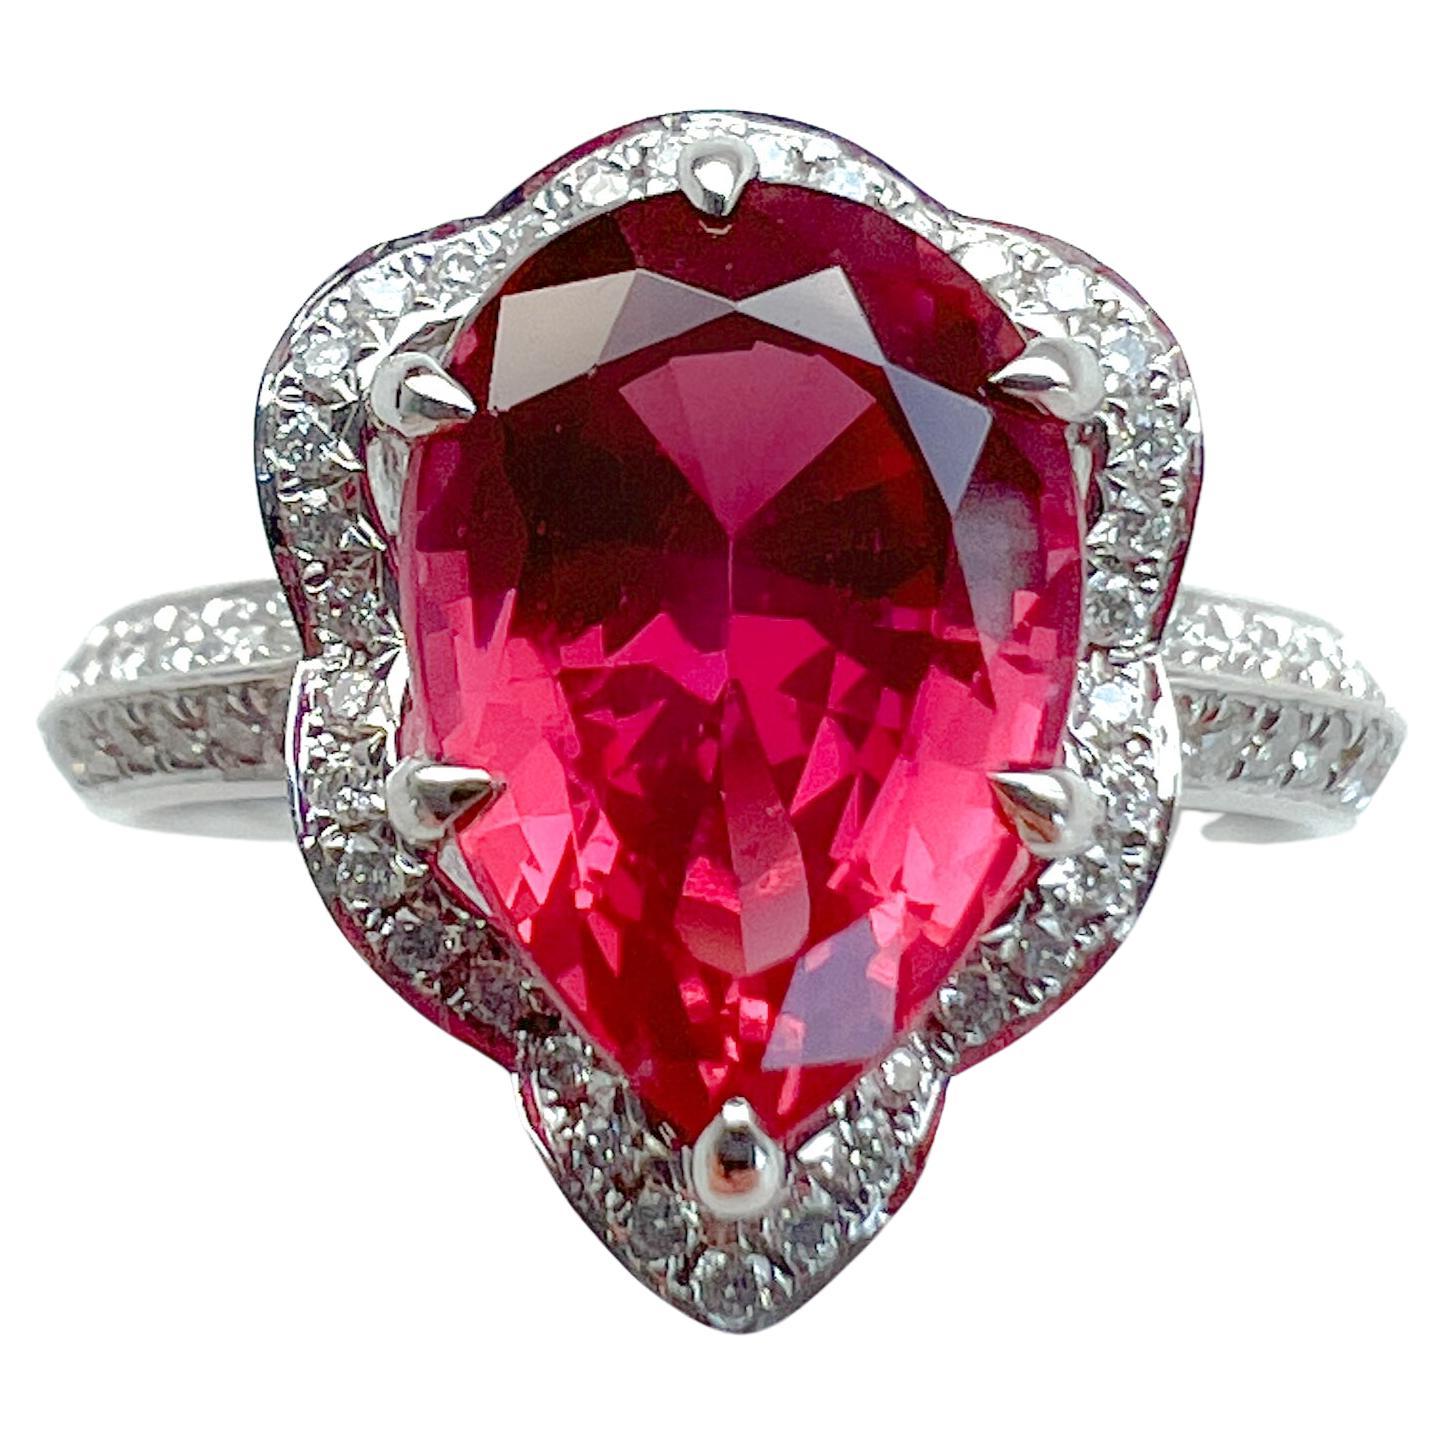 GIA Certified 3.09ct Red Spinel Cocktail Ring Ornate Halo